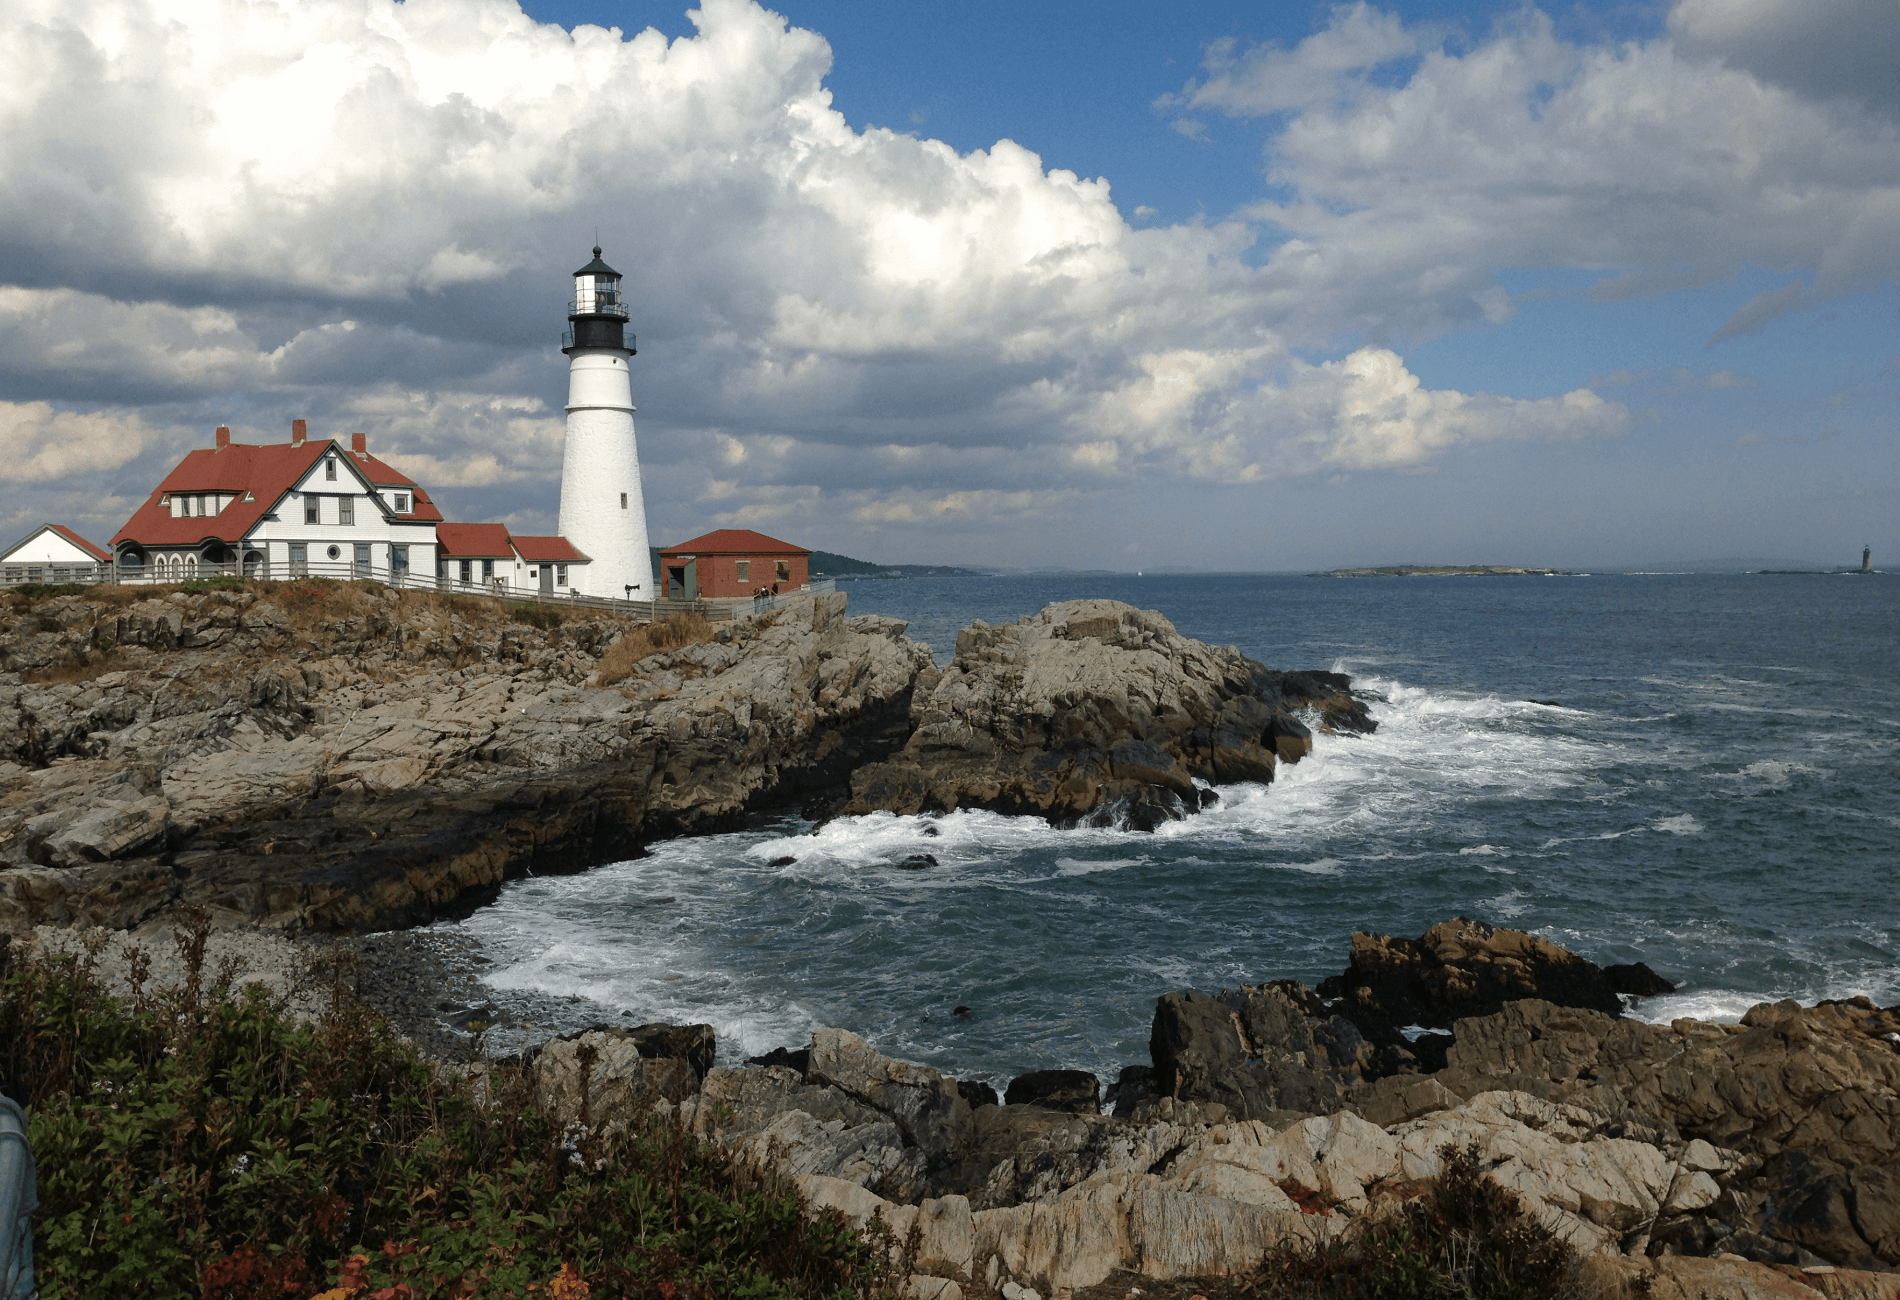 amtrak northeast summer sale, picture of lighthouse in new england